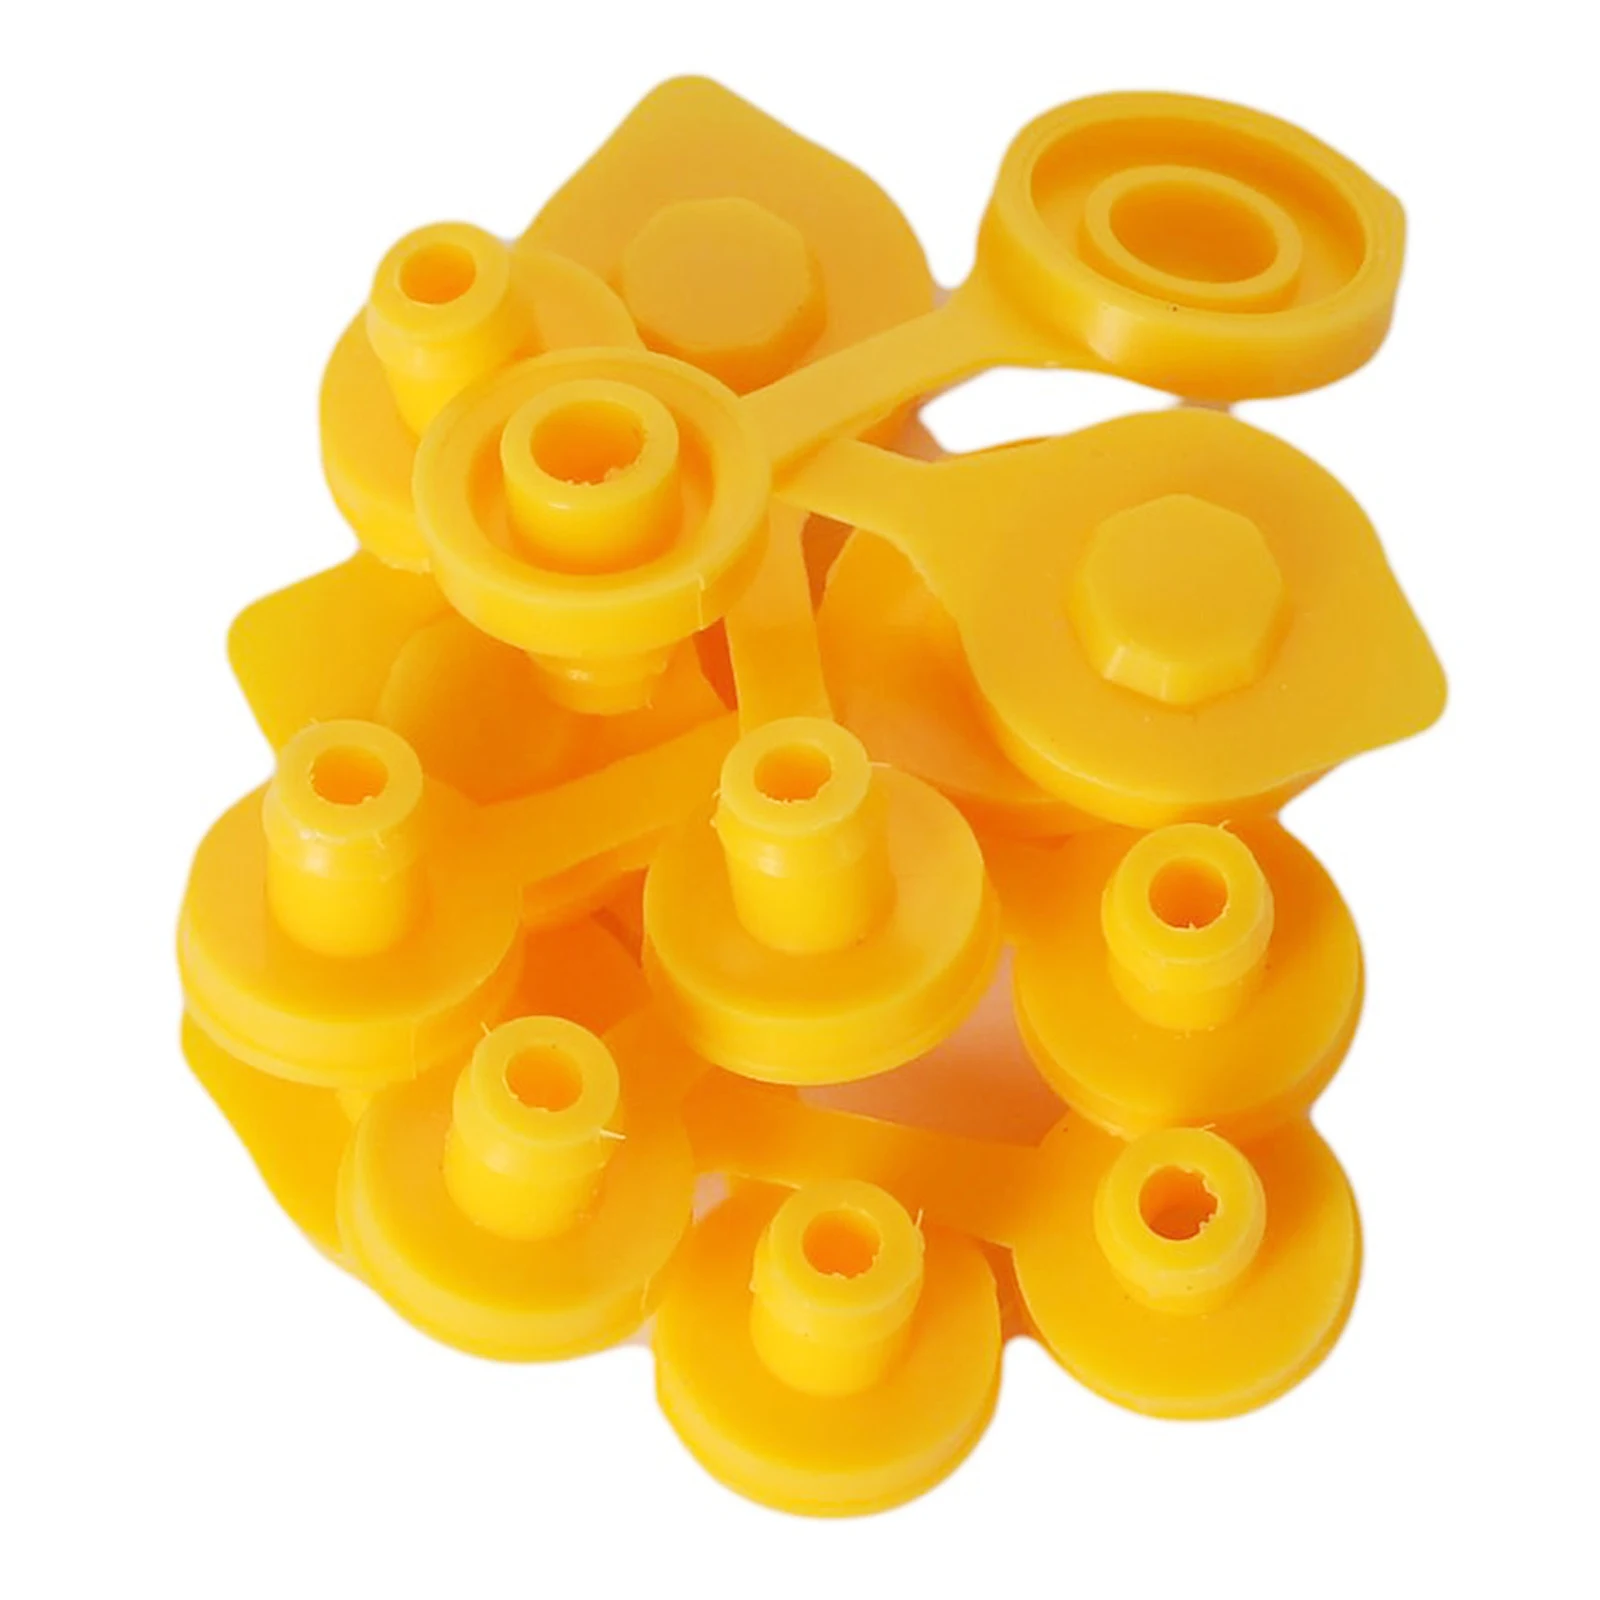 10pcs Yellow Gas Can Fuel Jug Vent Cap Plug Kit For Blitz/Korpin/Rotopax/Mace/Eagle High Quality Exhaust Cover Replacement Parts